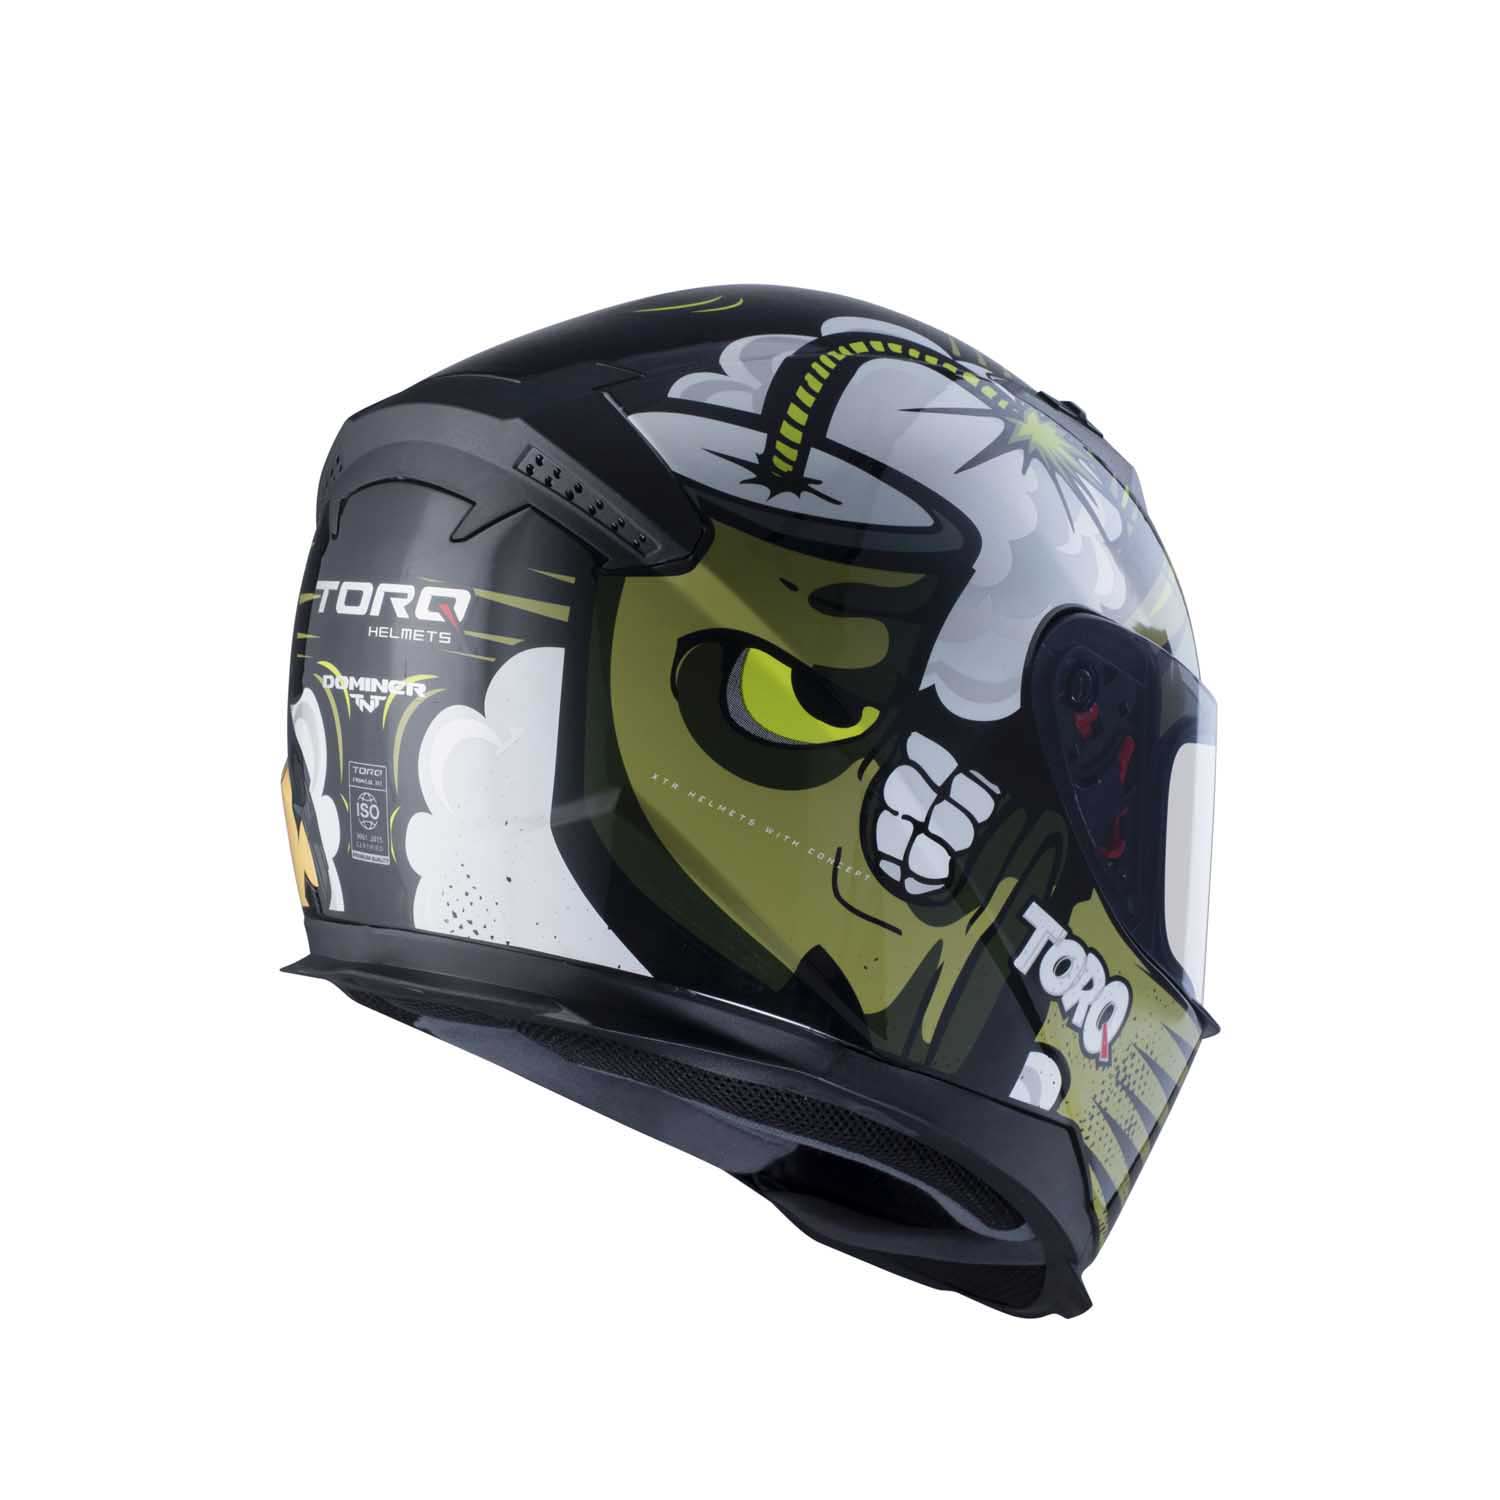 Clean and crisp high quality helmet product photography for e-commerce to easily attract the audience.